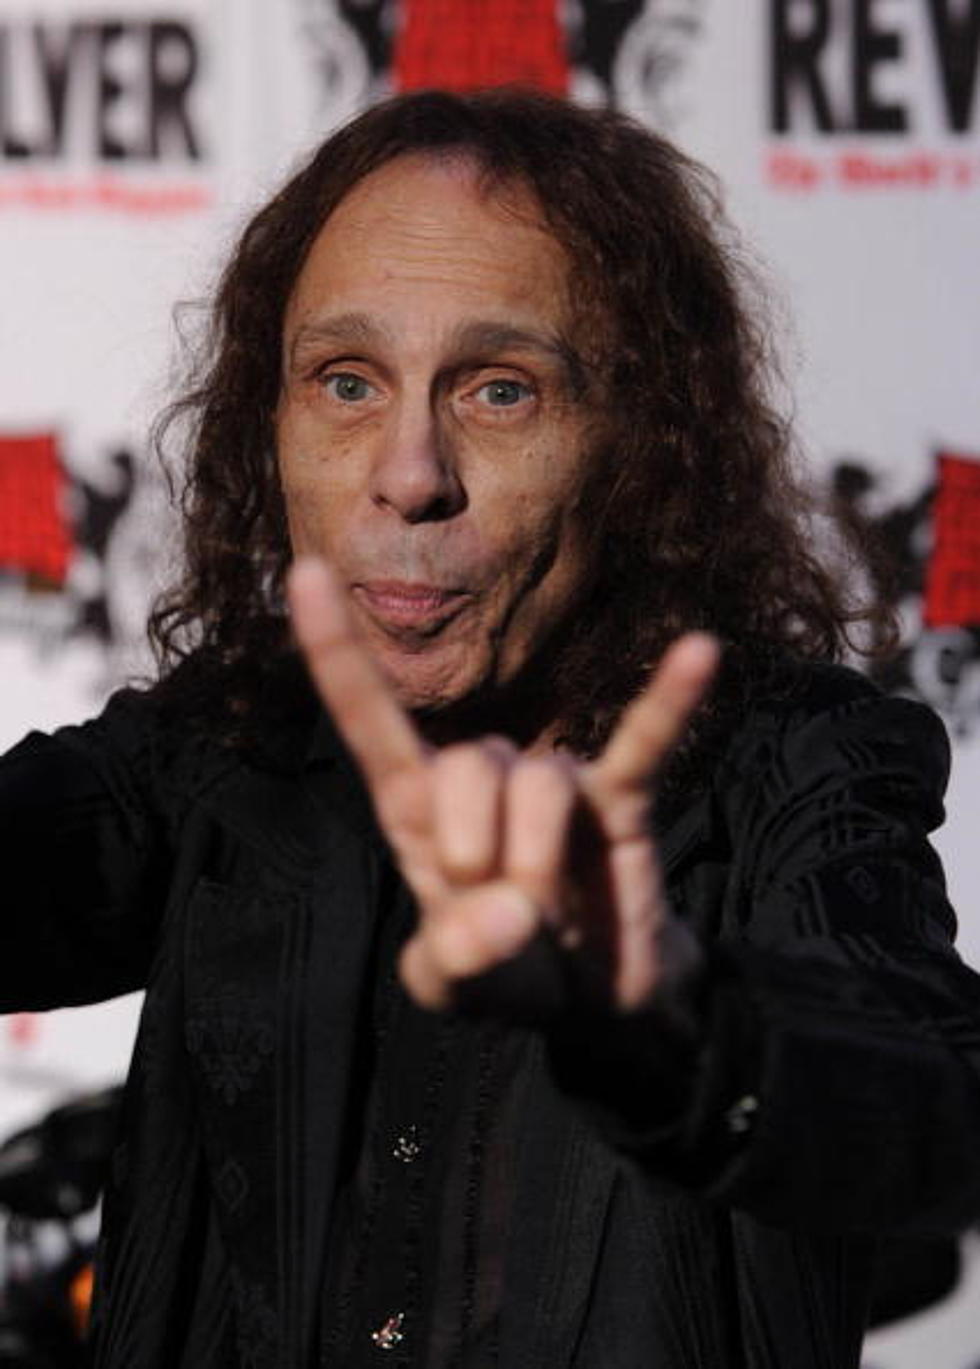 Ronnie James Dio “Stand Up And Shout” Cancer Fund Raises 450K